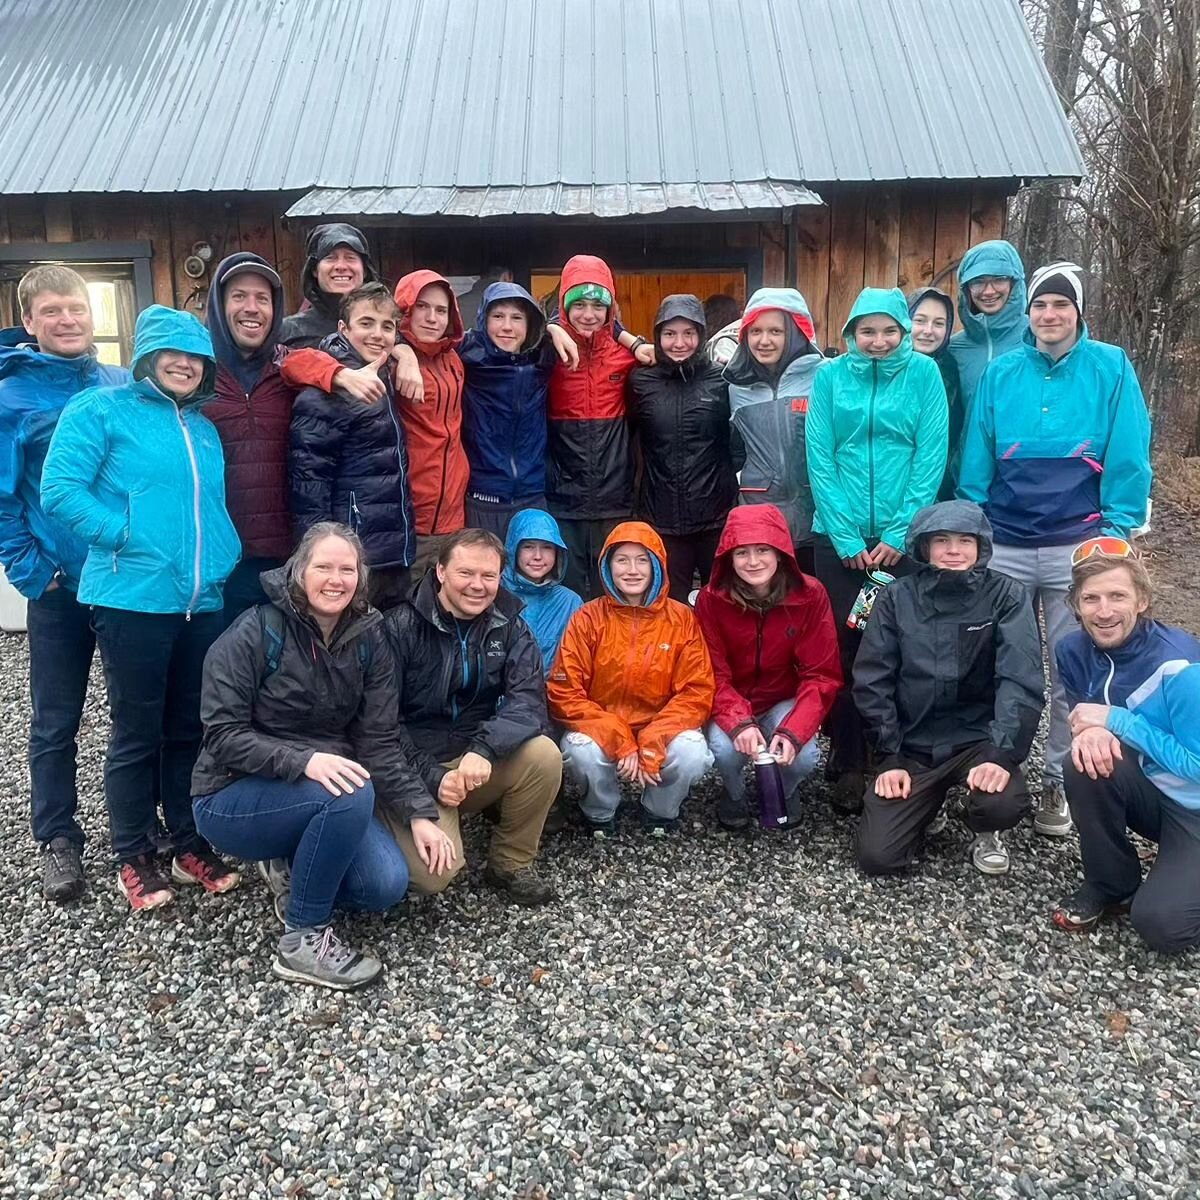 &quot;Damp but happy&quot; sums up the first full day in the Ottawa/Gatineau Region for Team Sask at Nordiq Canada Ski Nationals.

Today was the Official Training Day to give the athletes and coaches a chance to ski the race courses before the racing